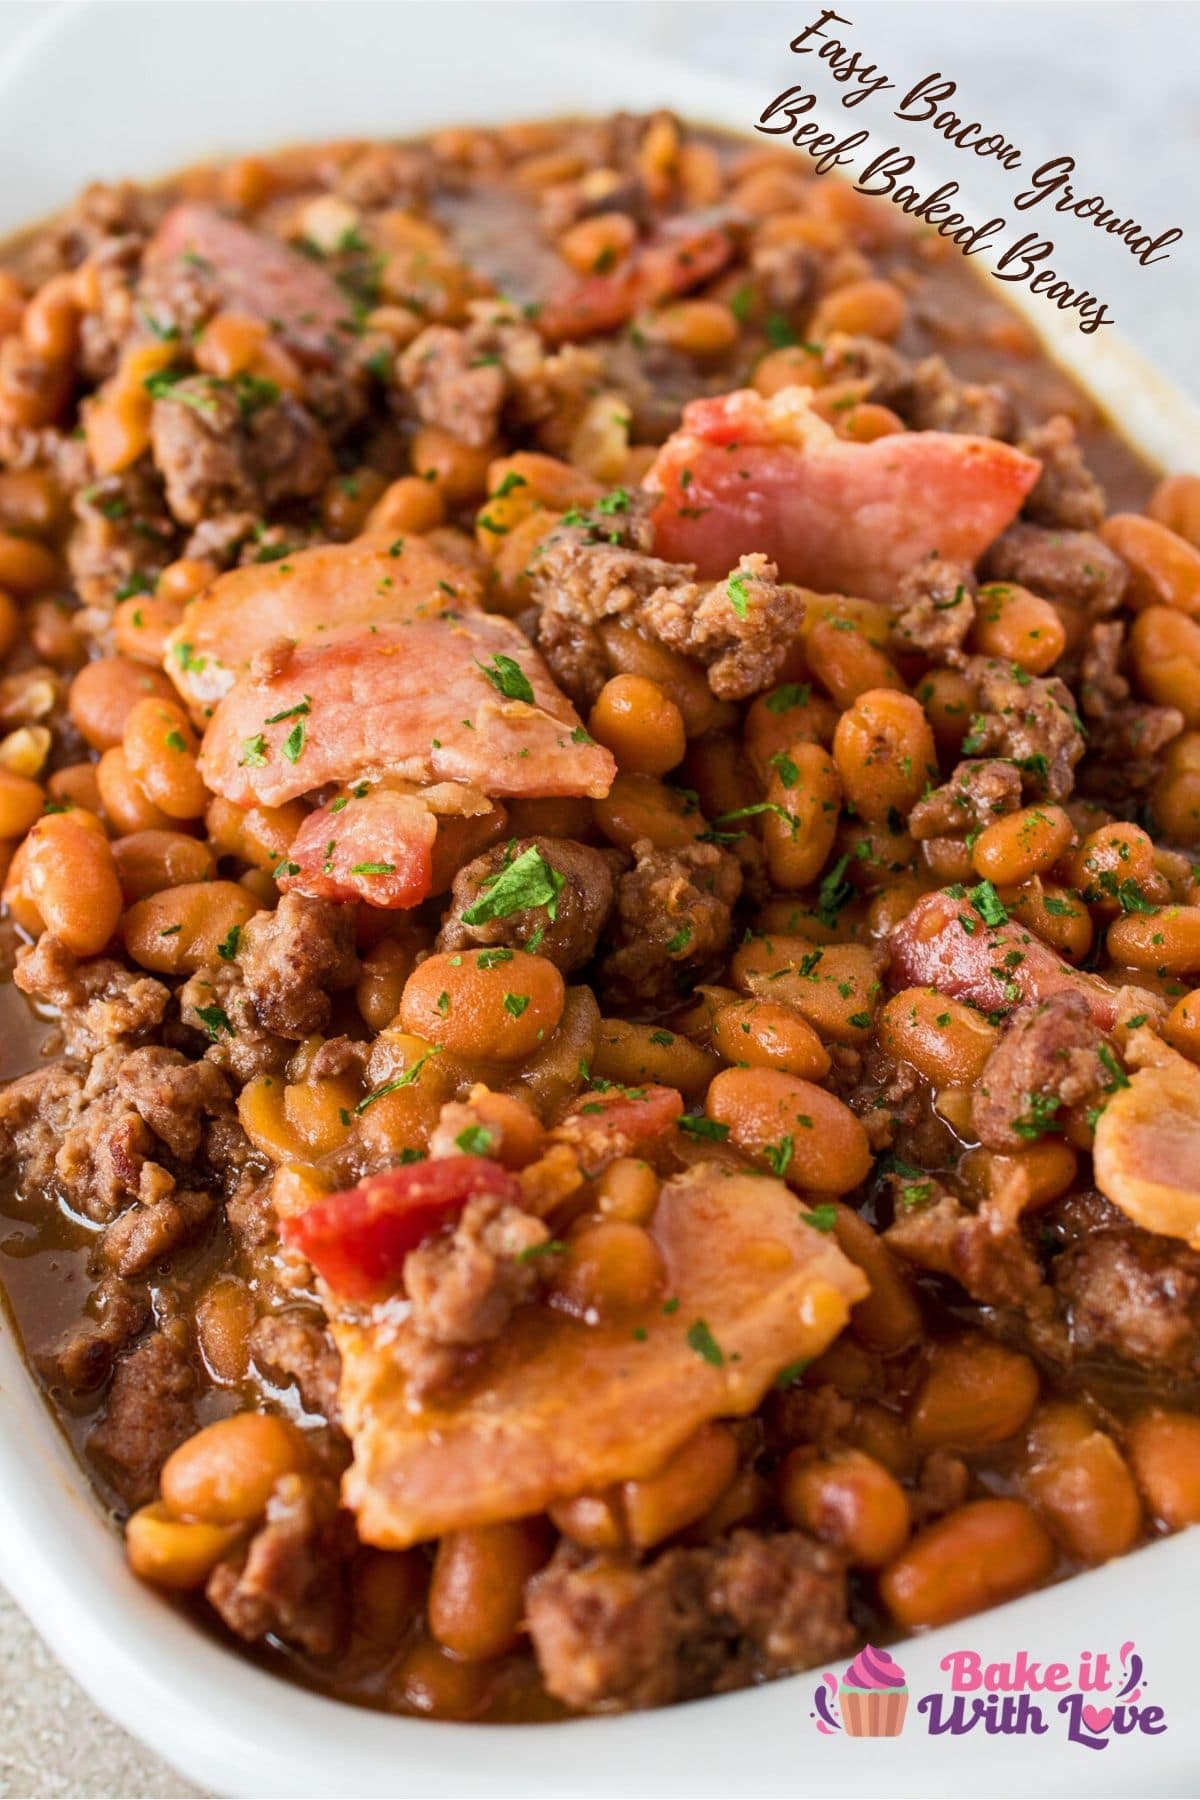 Tall image of baked beans with bacon.